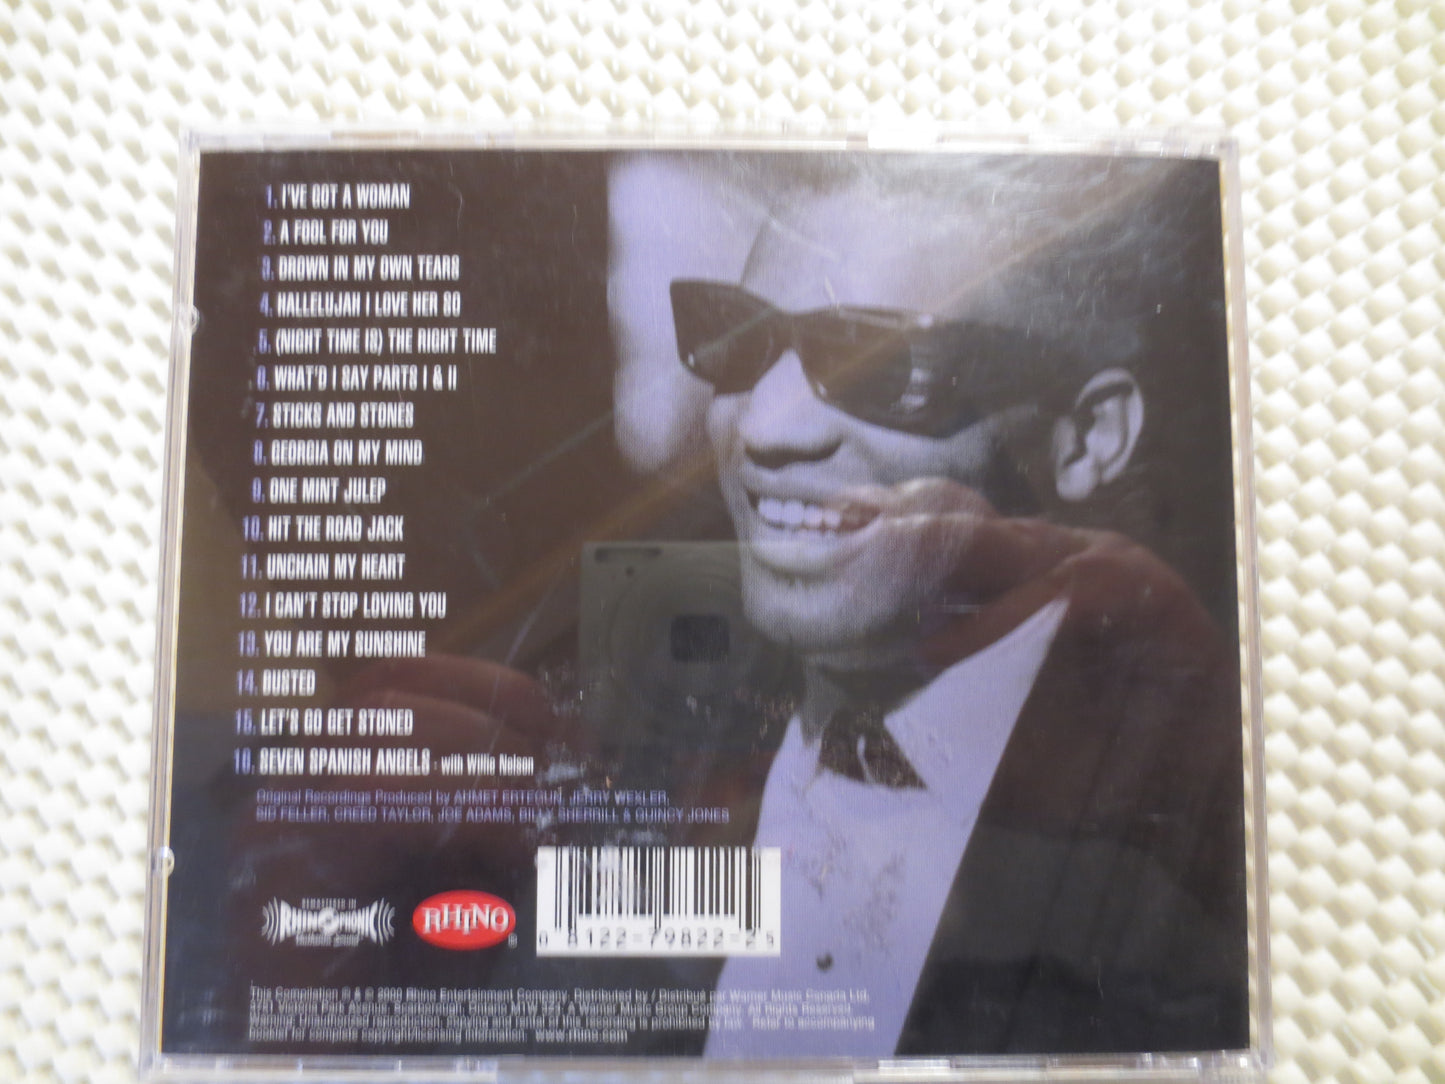 RAY CHARLES, BEST of Album, Ray Charles Cd, Ray Charles Music, Ray Charles Song, Pop Music Cd, Jazz Cd, 2000 Compact Discs